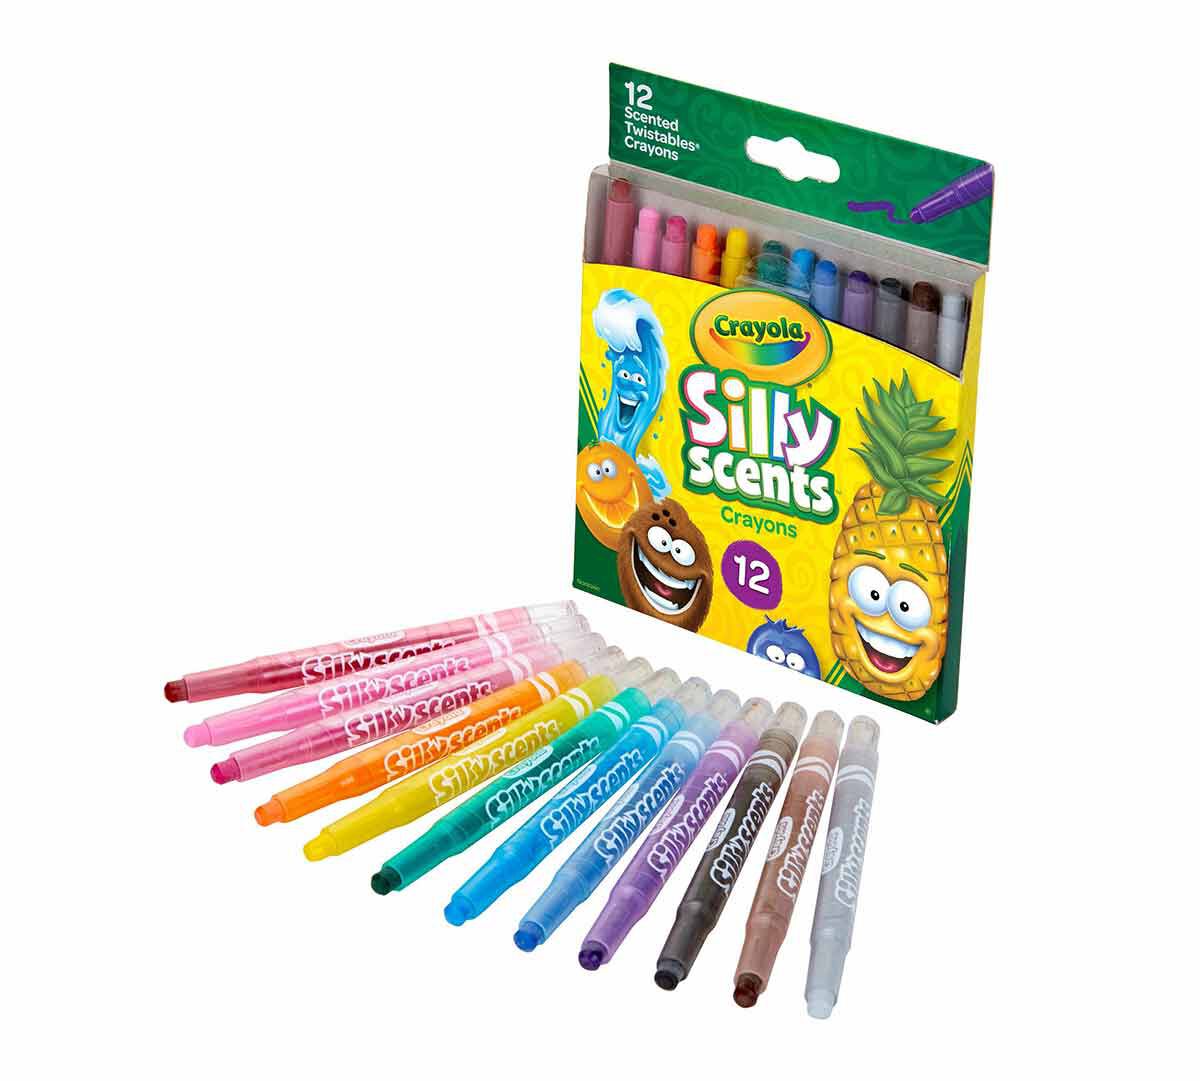 Crayola Silly Scents Twistables Crayons 12pk